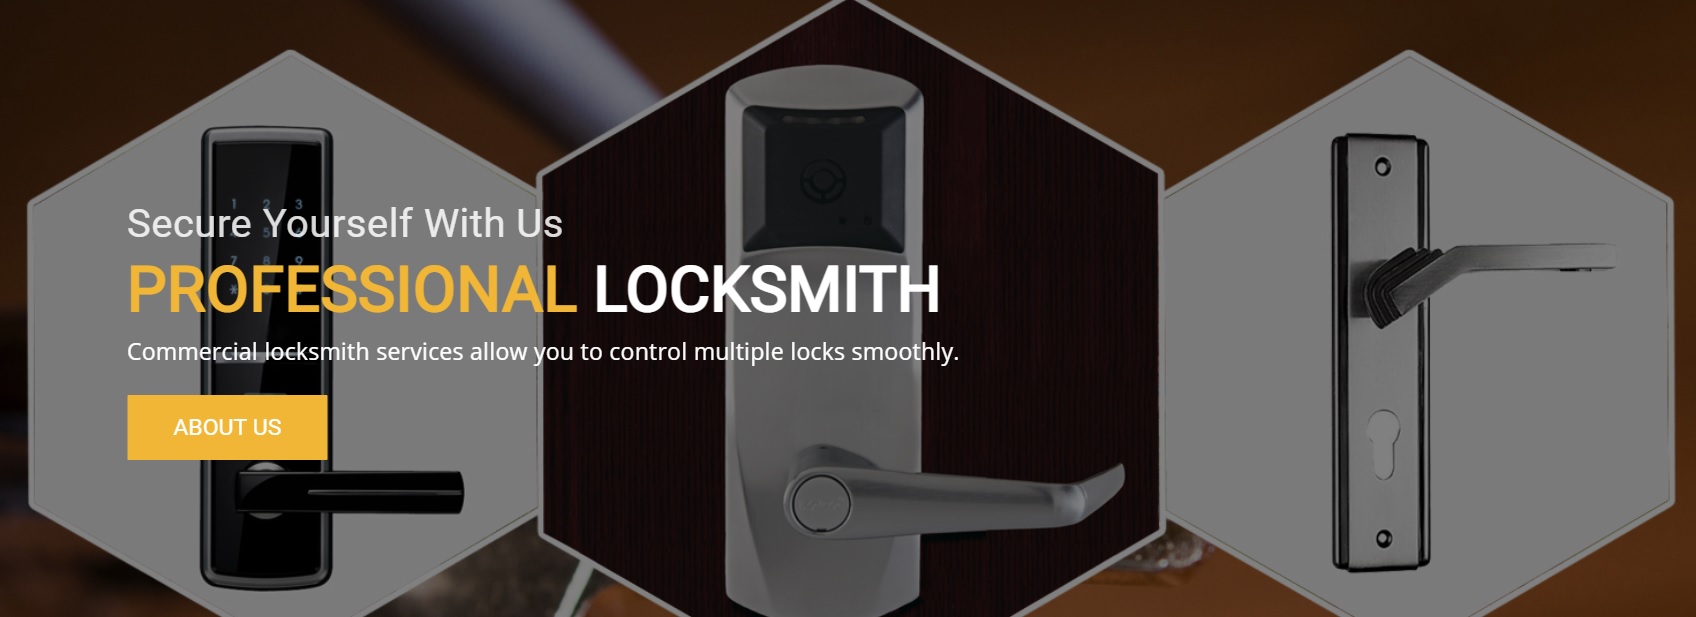 Residential, Commercial Locksmith Services